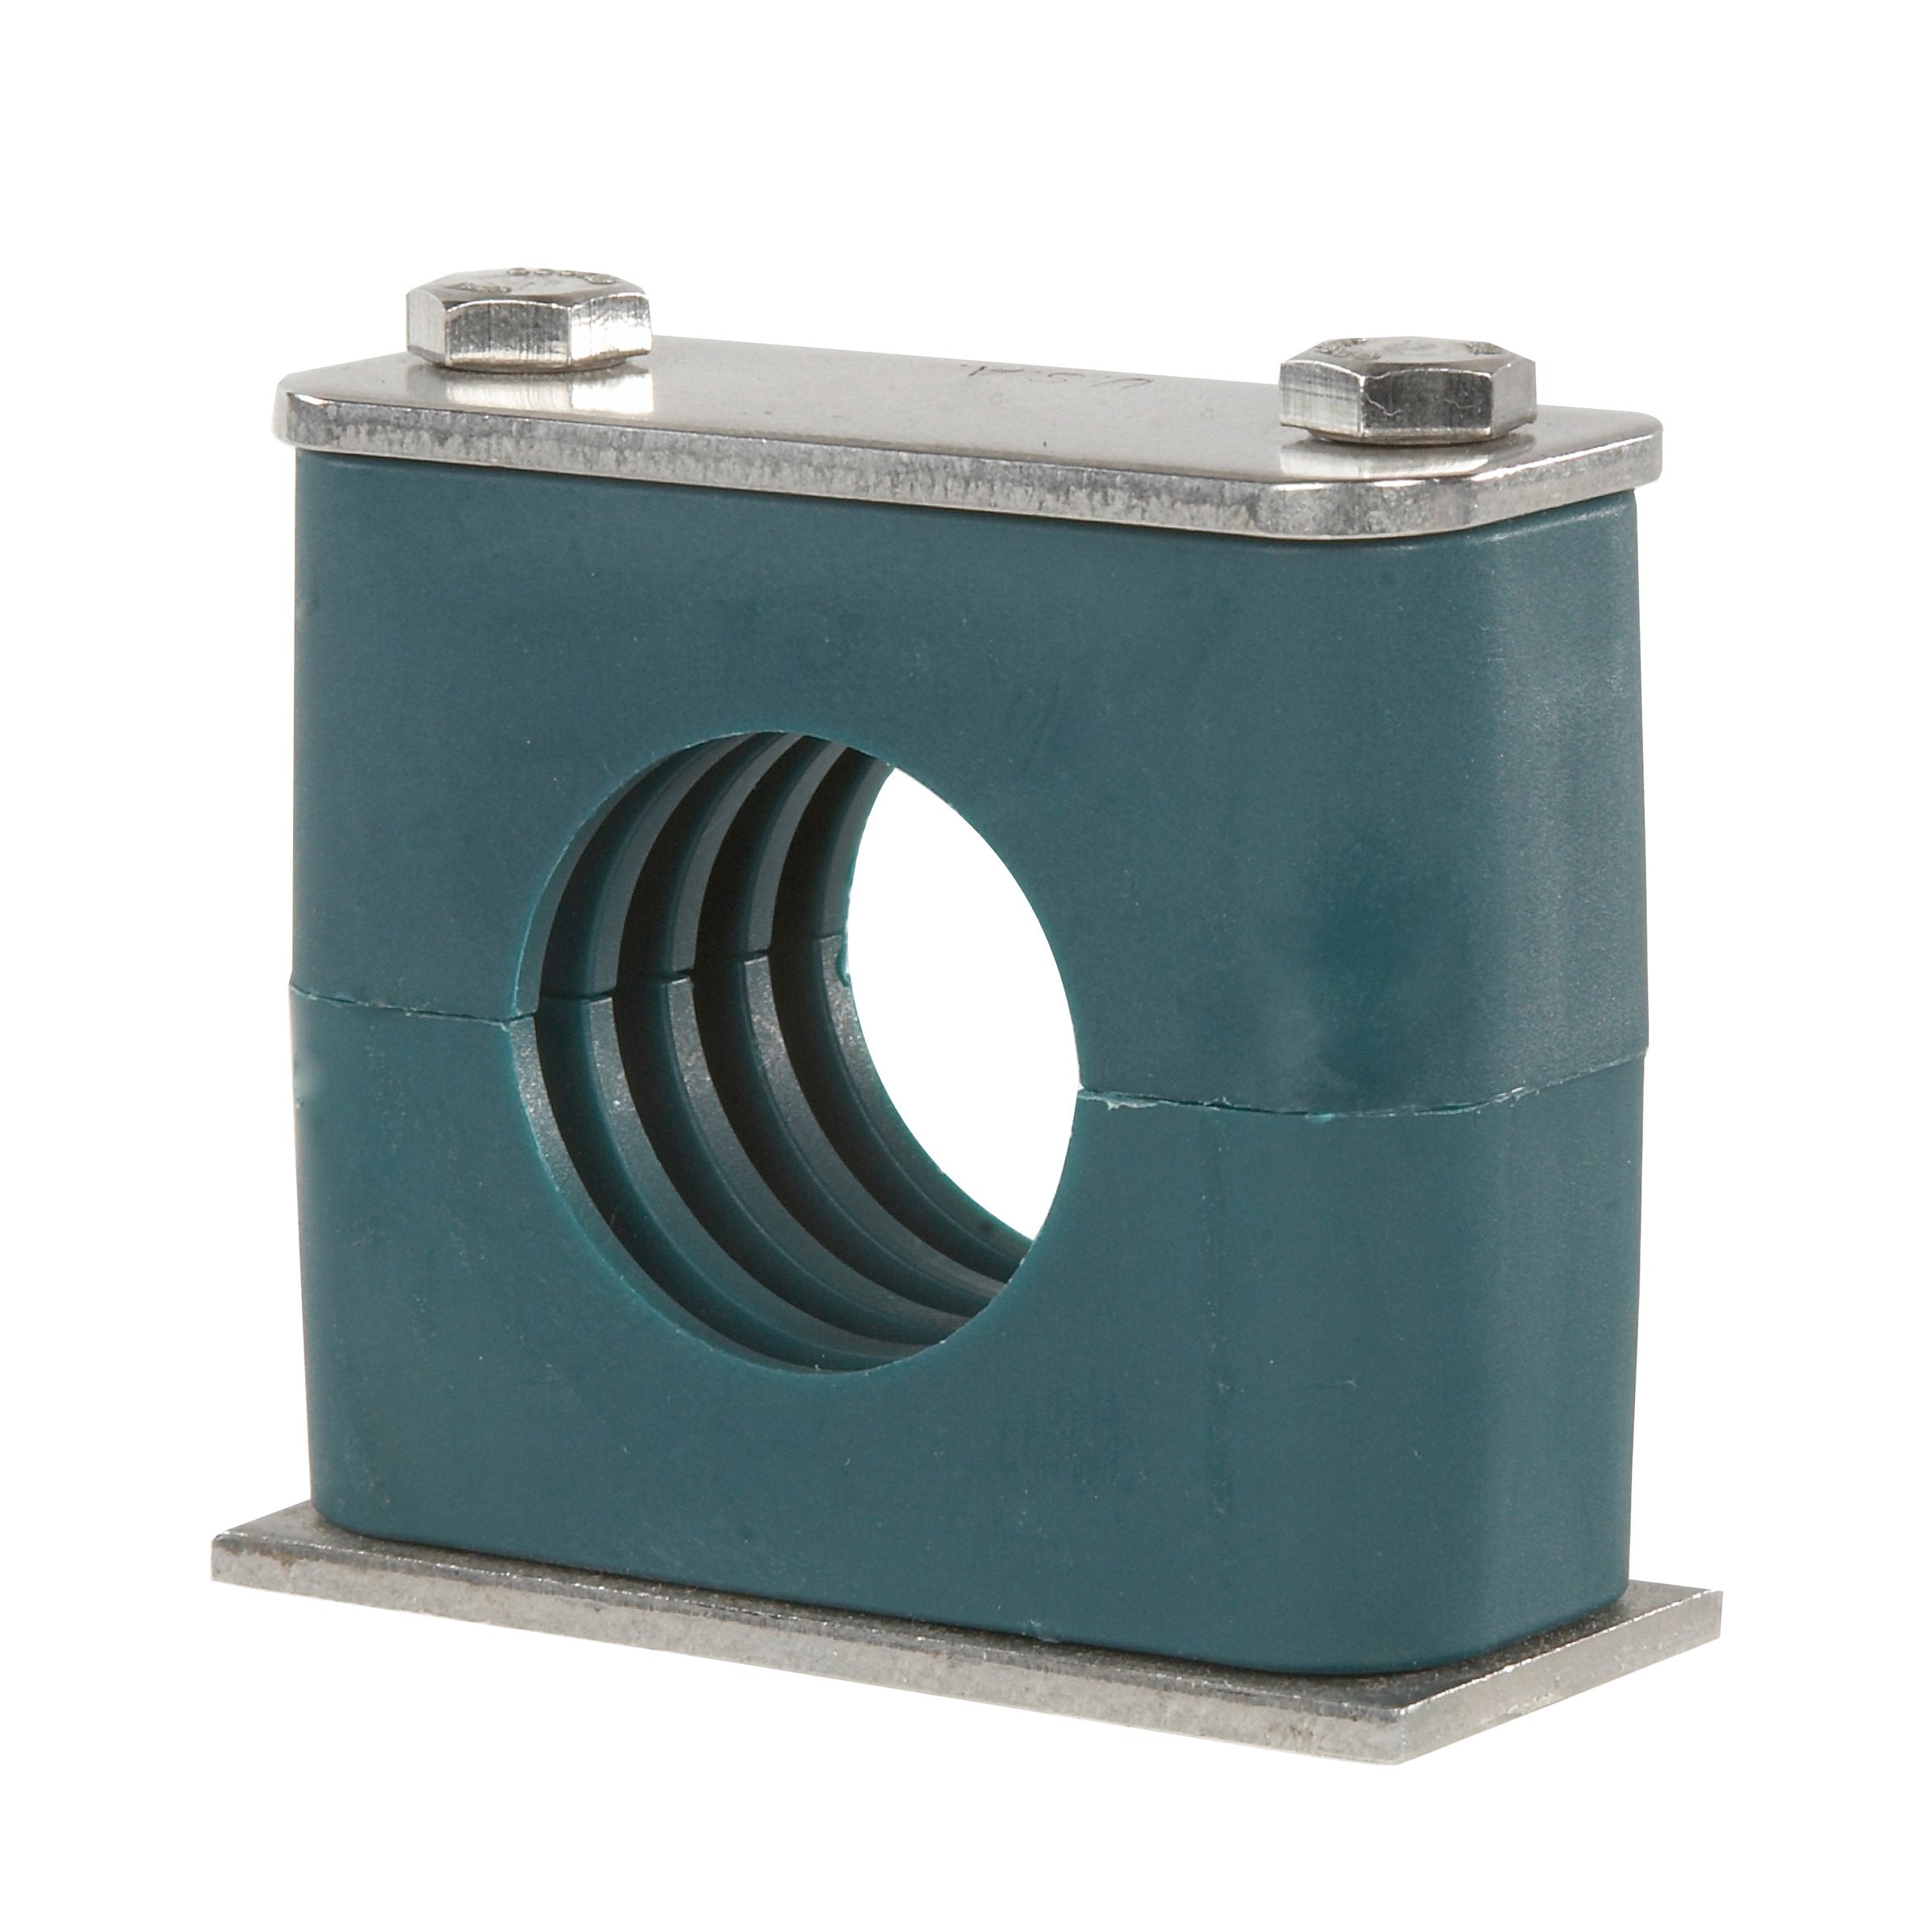 SP-542-PP-DP-AS-U-W5 : Stauff Clamp, Single Weld Plate, 1.65" (42mm) OD, for 1.25" Pipe, Green PP Insert, Profiled Interior, 316SS